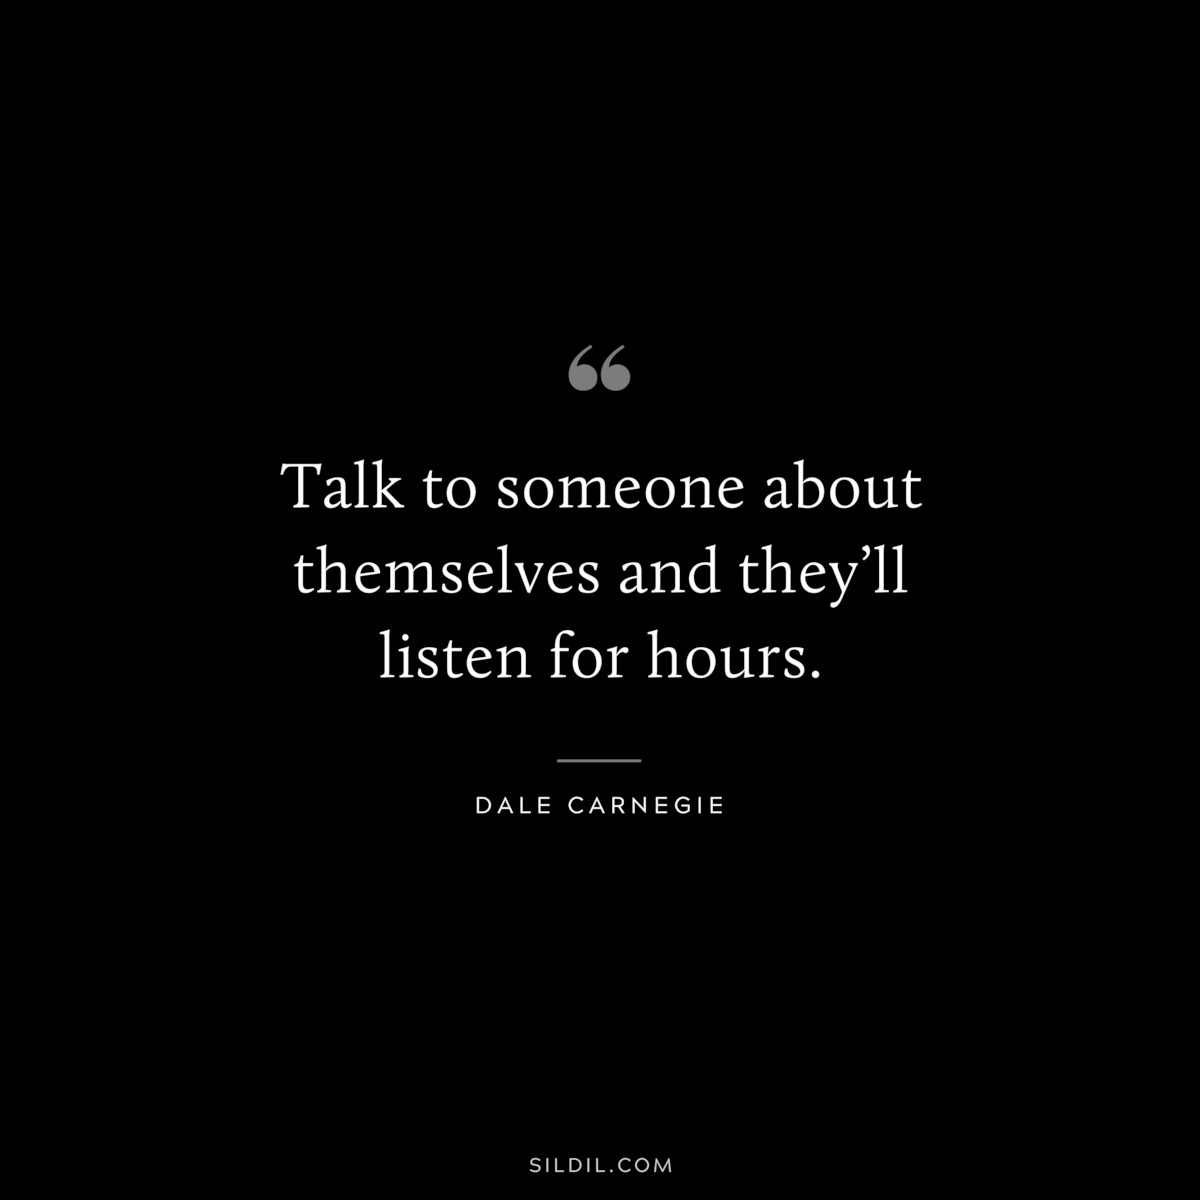 Talk to someone about themselves and they’ll listen for hours.― Dale Carnegie